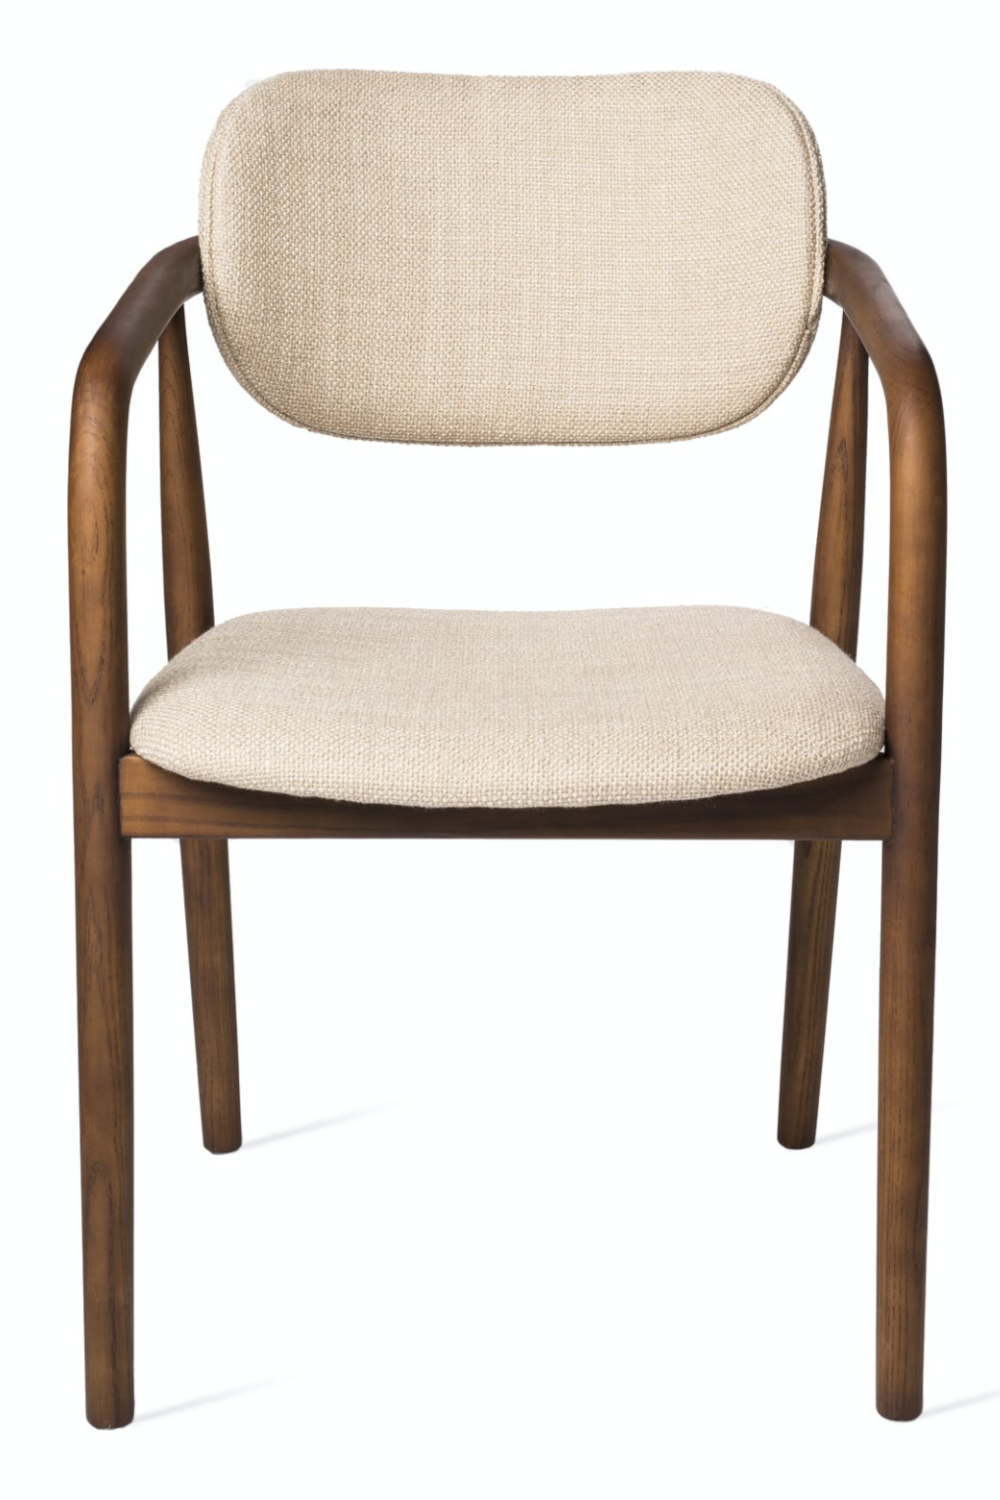 Natural Beige Dining Chair | Pols Potten Henry | OROA.com